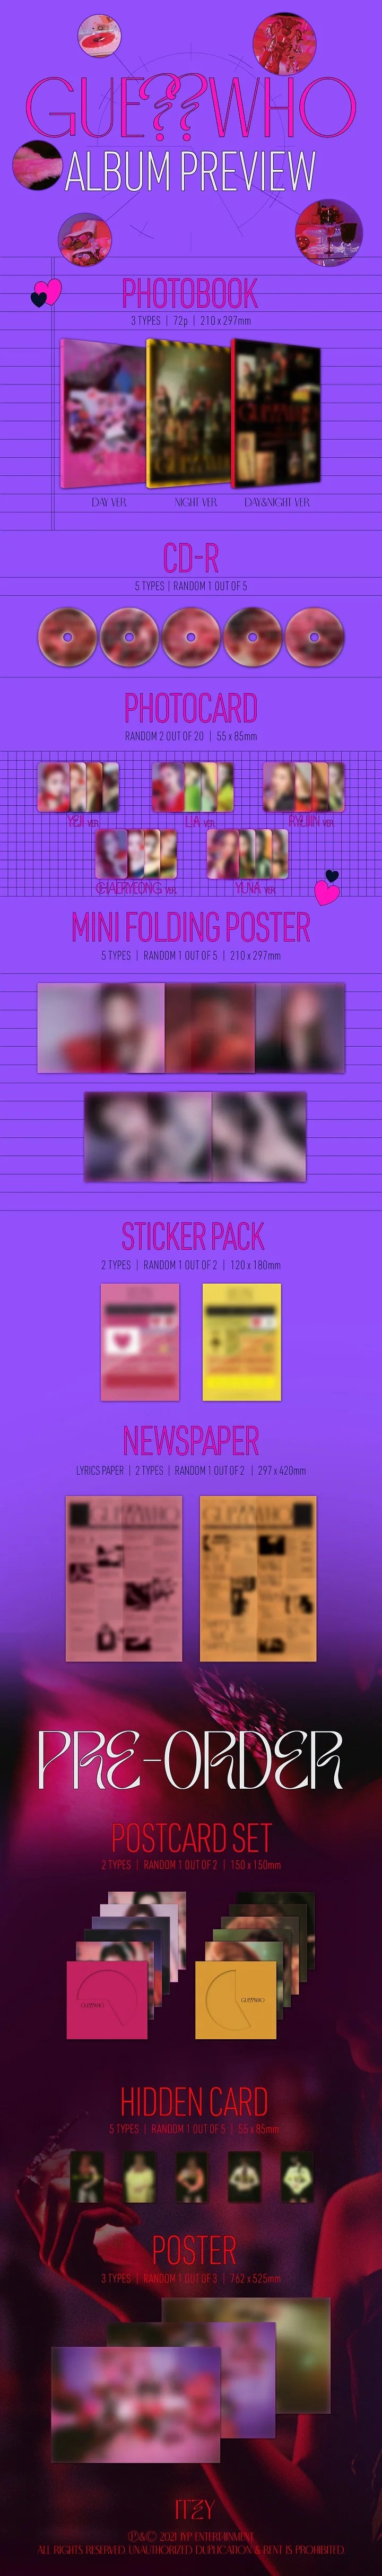 ITZY GUESS WHO Infographic